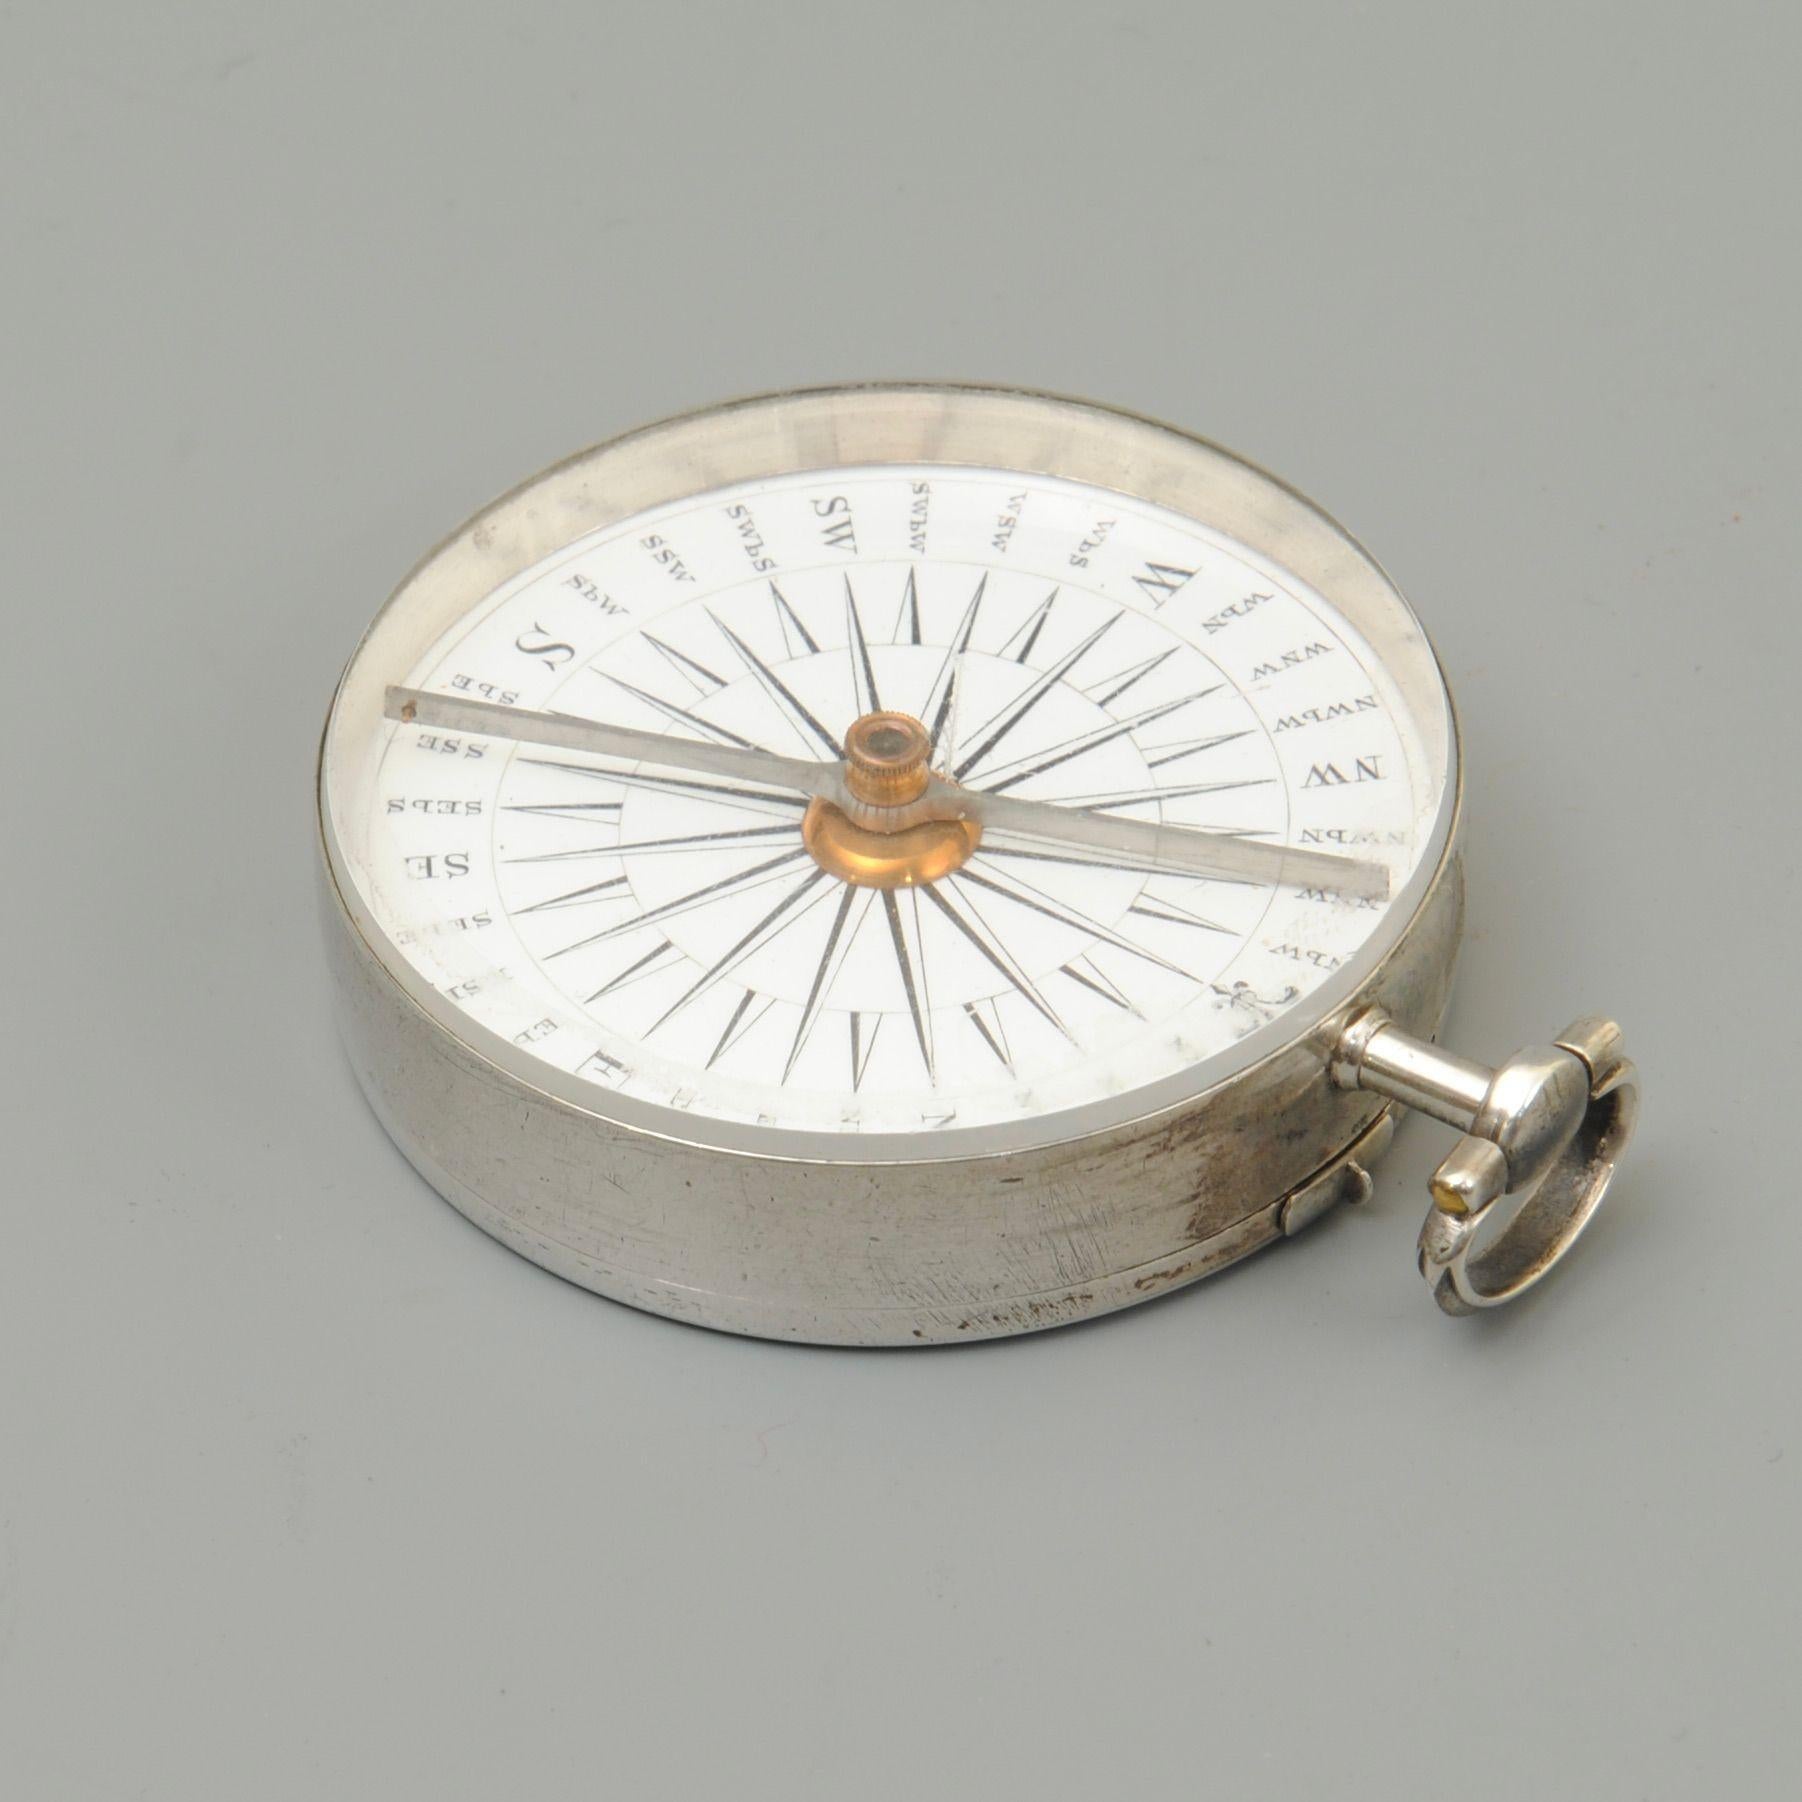 An 18th century silver pocket compass signed by Watkins Charing cross, London
The enamel compass rose finely segmented 
Marked TH and dated 1787.